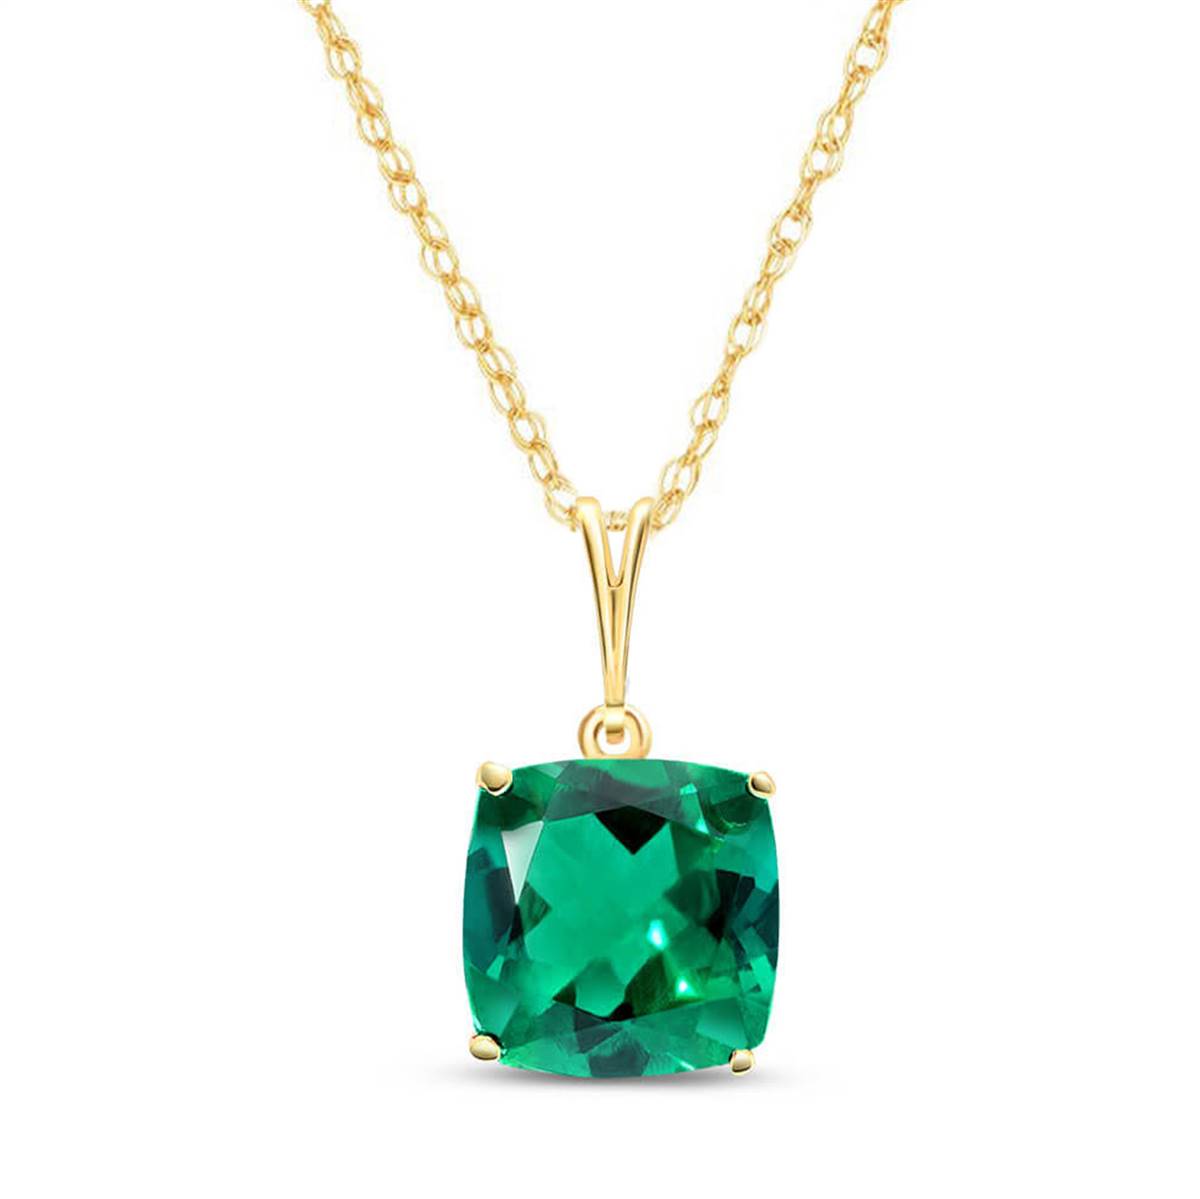 14K Solid Yellow  Gold Necklace With Cushion Shape 3.10 ctw High Polished Genuine Emerald - Grade AAA